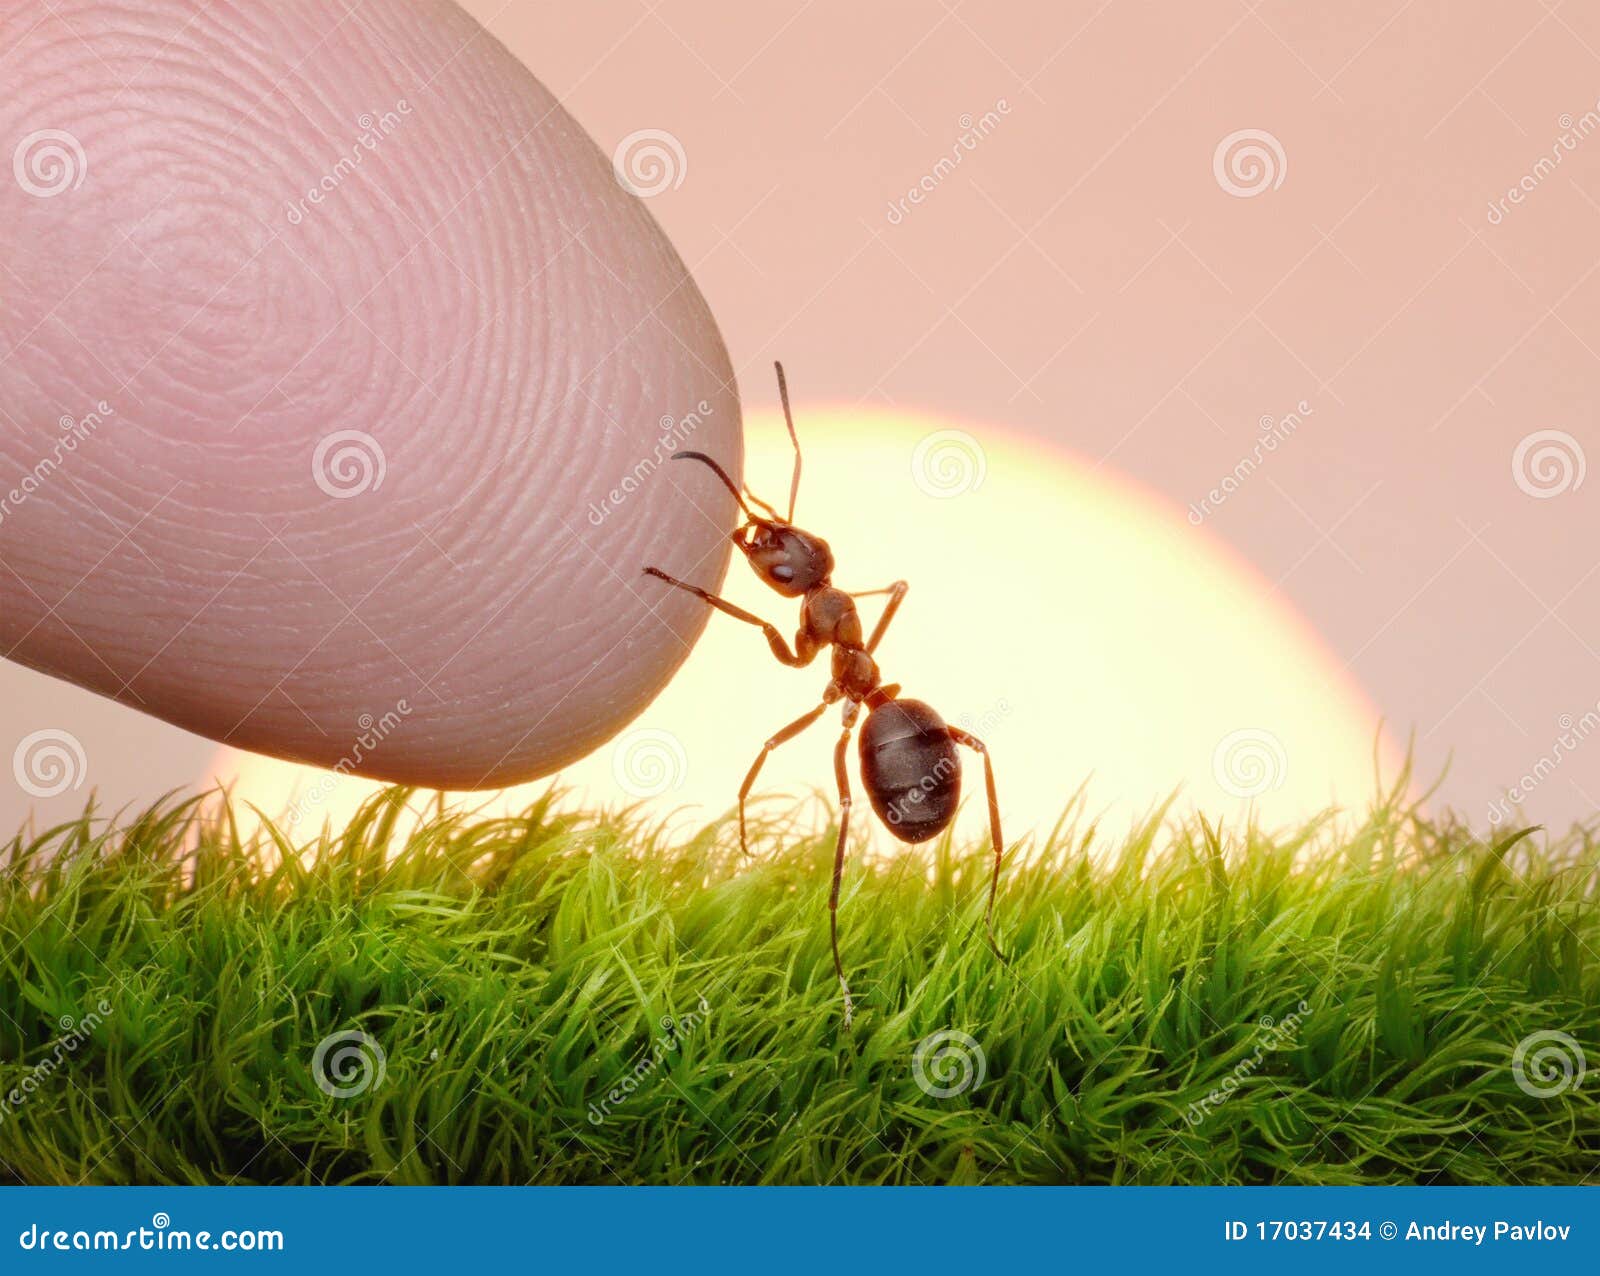 human, nature and ant - finger of friendship